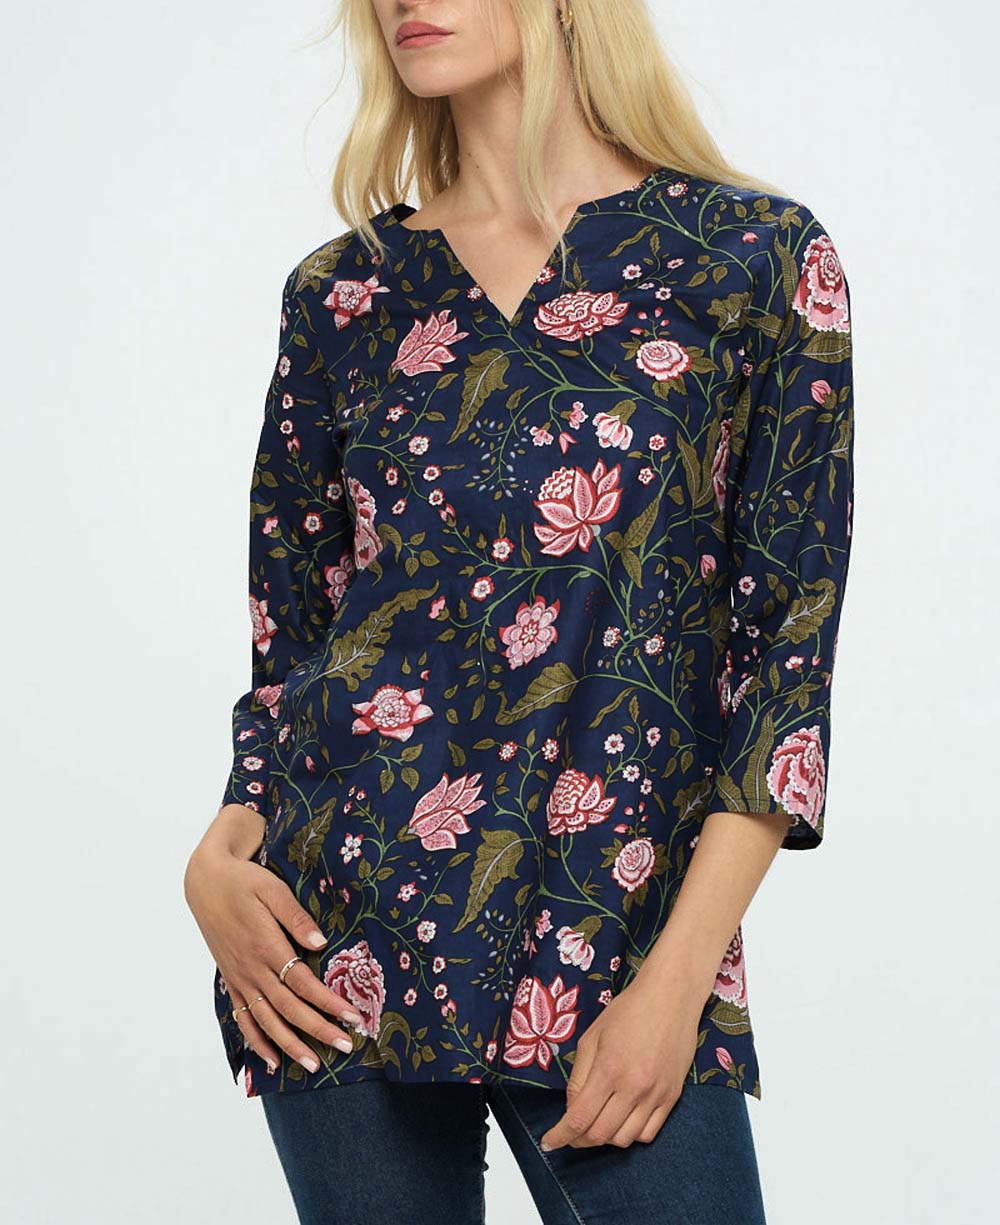 Floral Gardens Kurta Tunic Top, Multiple Colors and Prints - Shirts & Tops Navy S